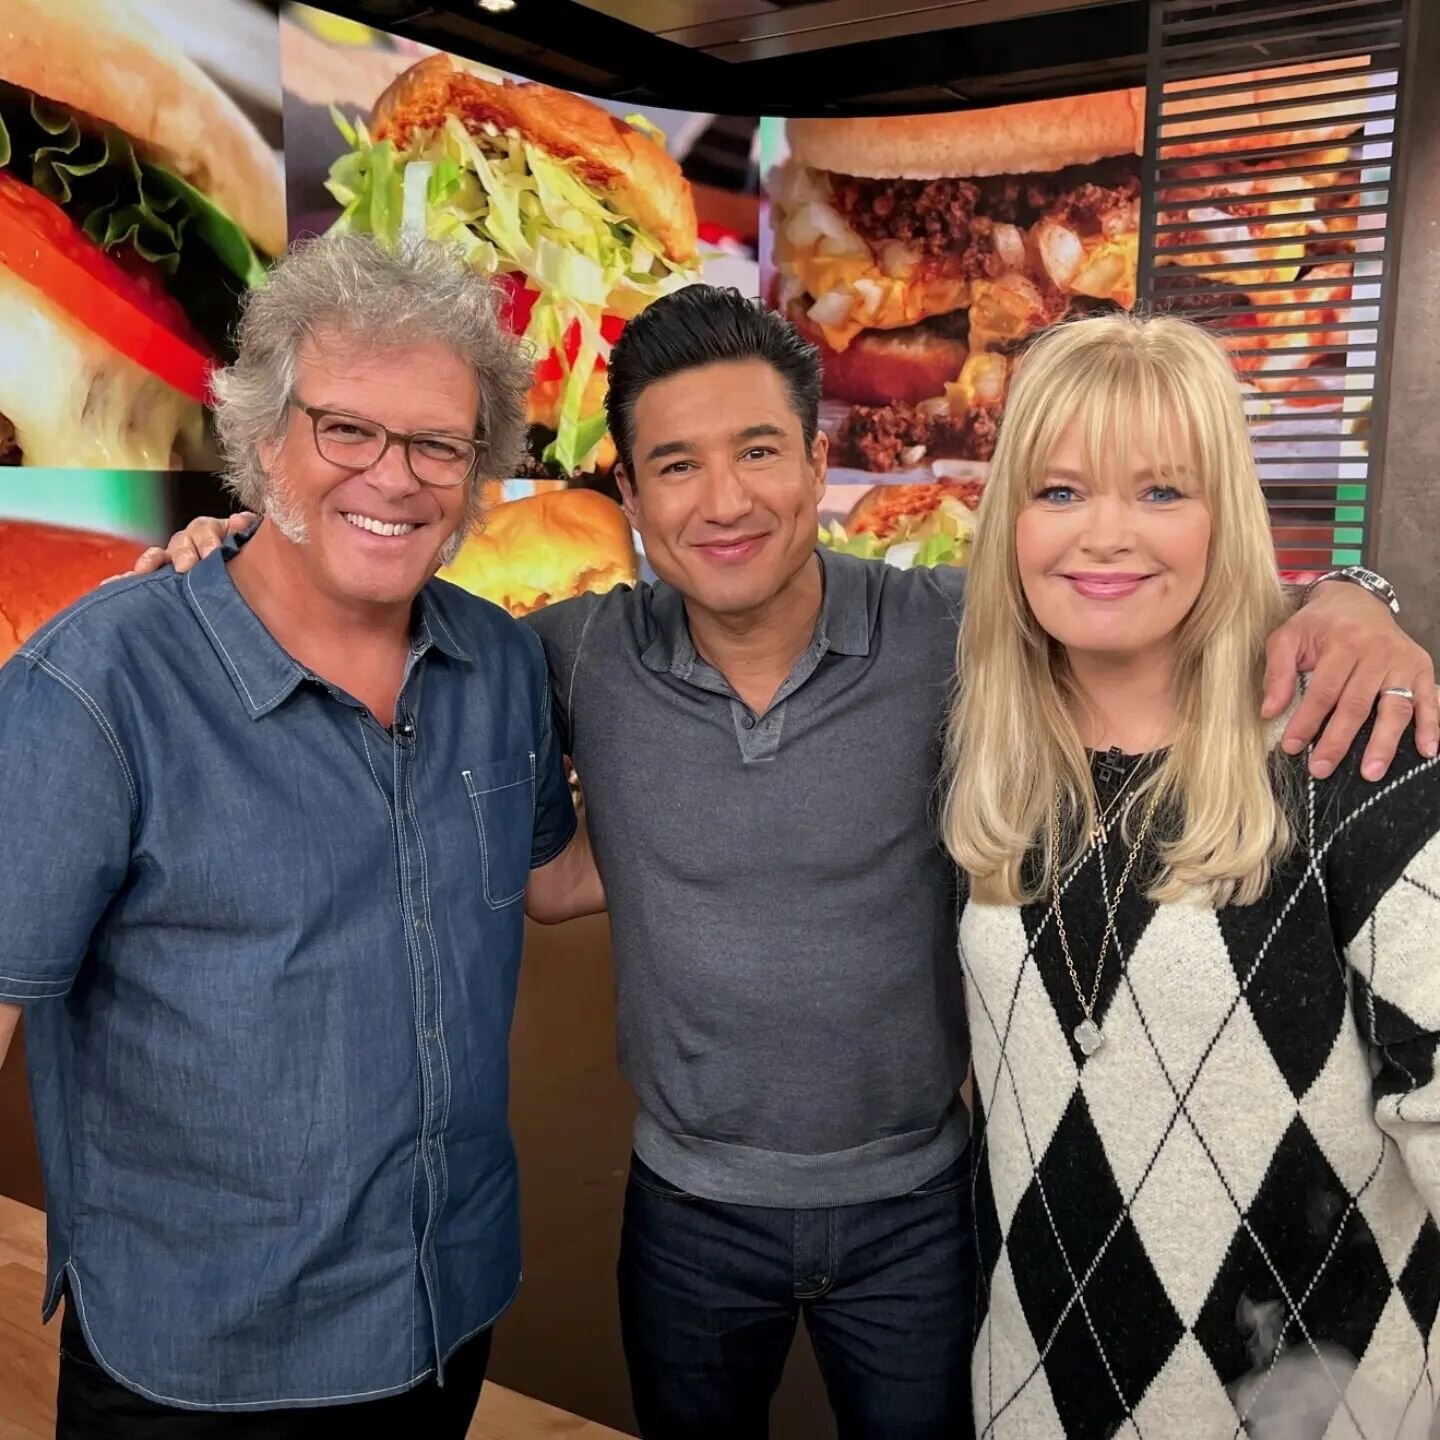 Had a GREAT time visiting the #accessdaily set this week and the segment airs TODAY (Friday 9/23). Check local listings, in NYC airs 2pm on NBC. Talked burger history, condiments and made 3 burgs for @mariolopez and @melissapeterman including of cour